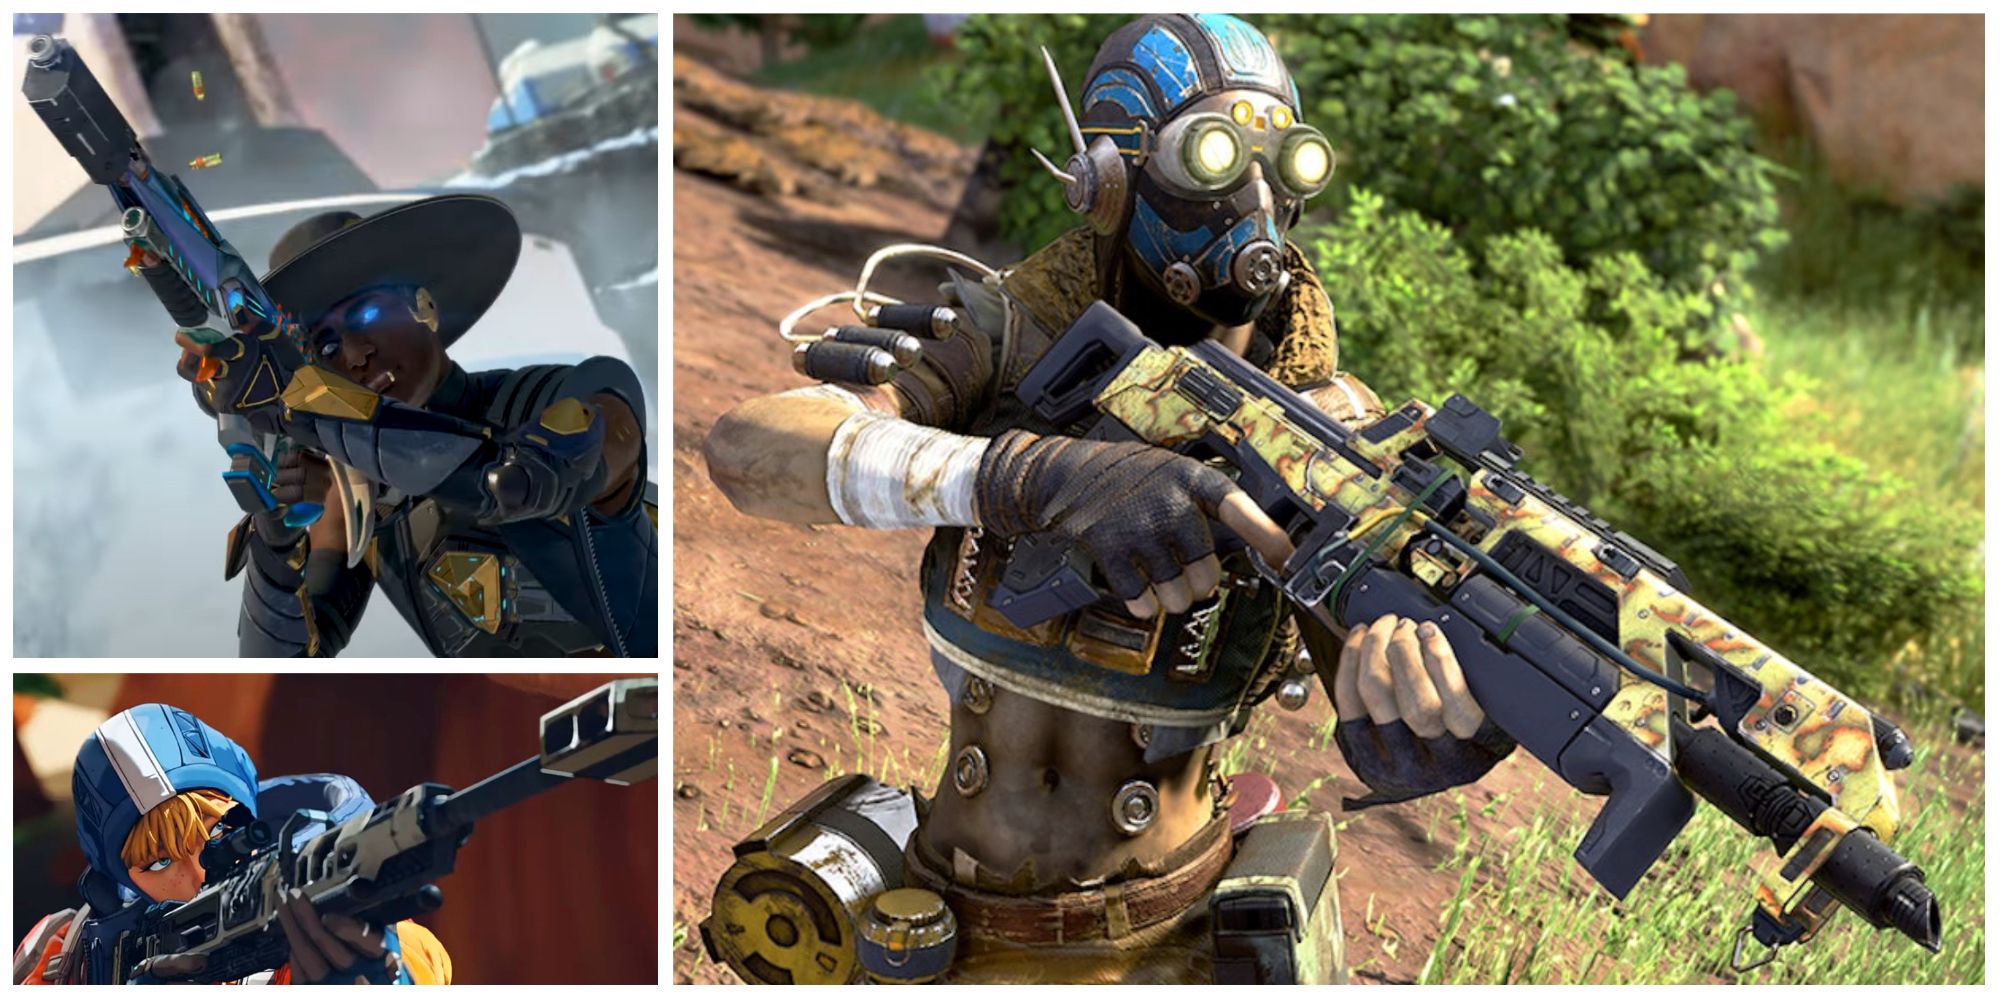 Collage of Seer, Wattson, and Octane holding firearms in Apex